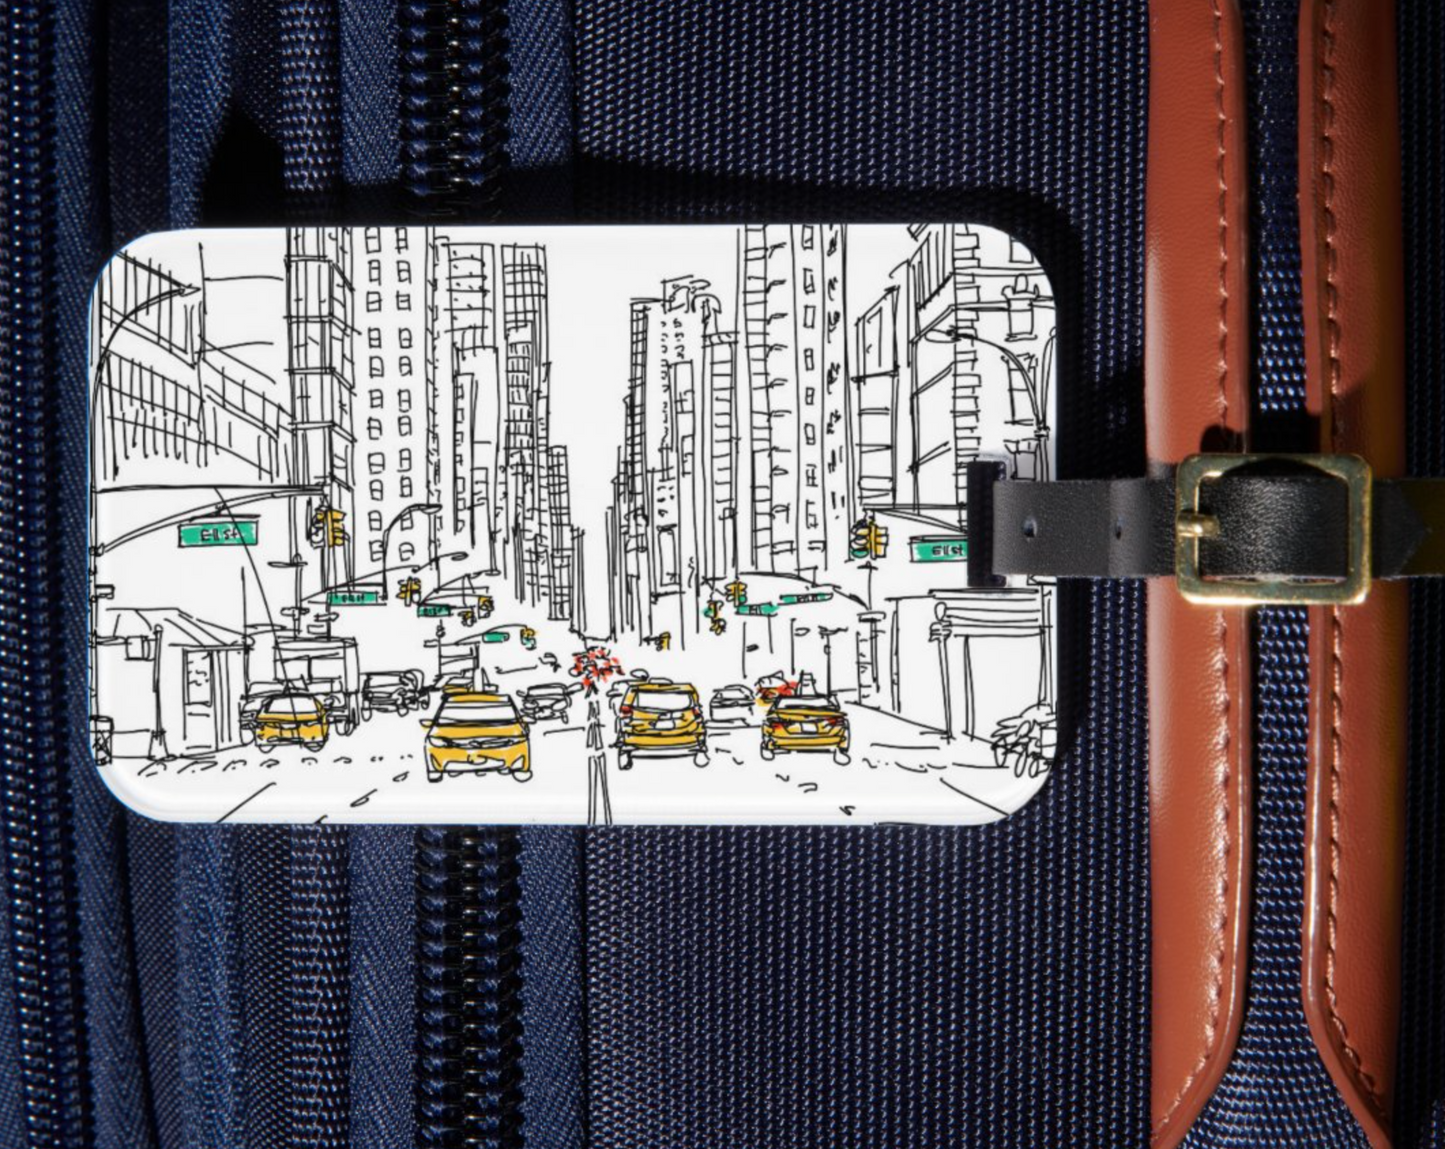 bowery taxi -- luggage tags